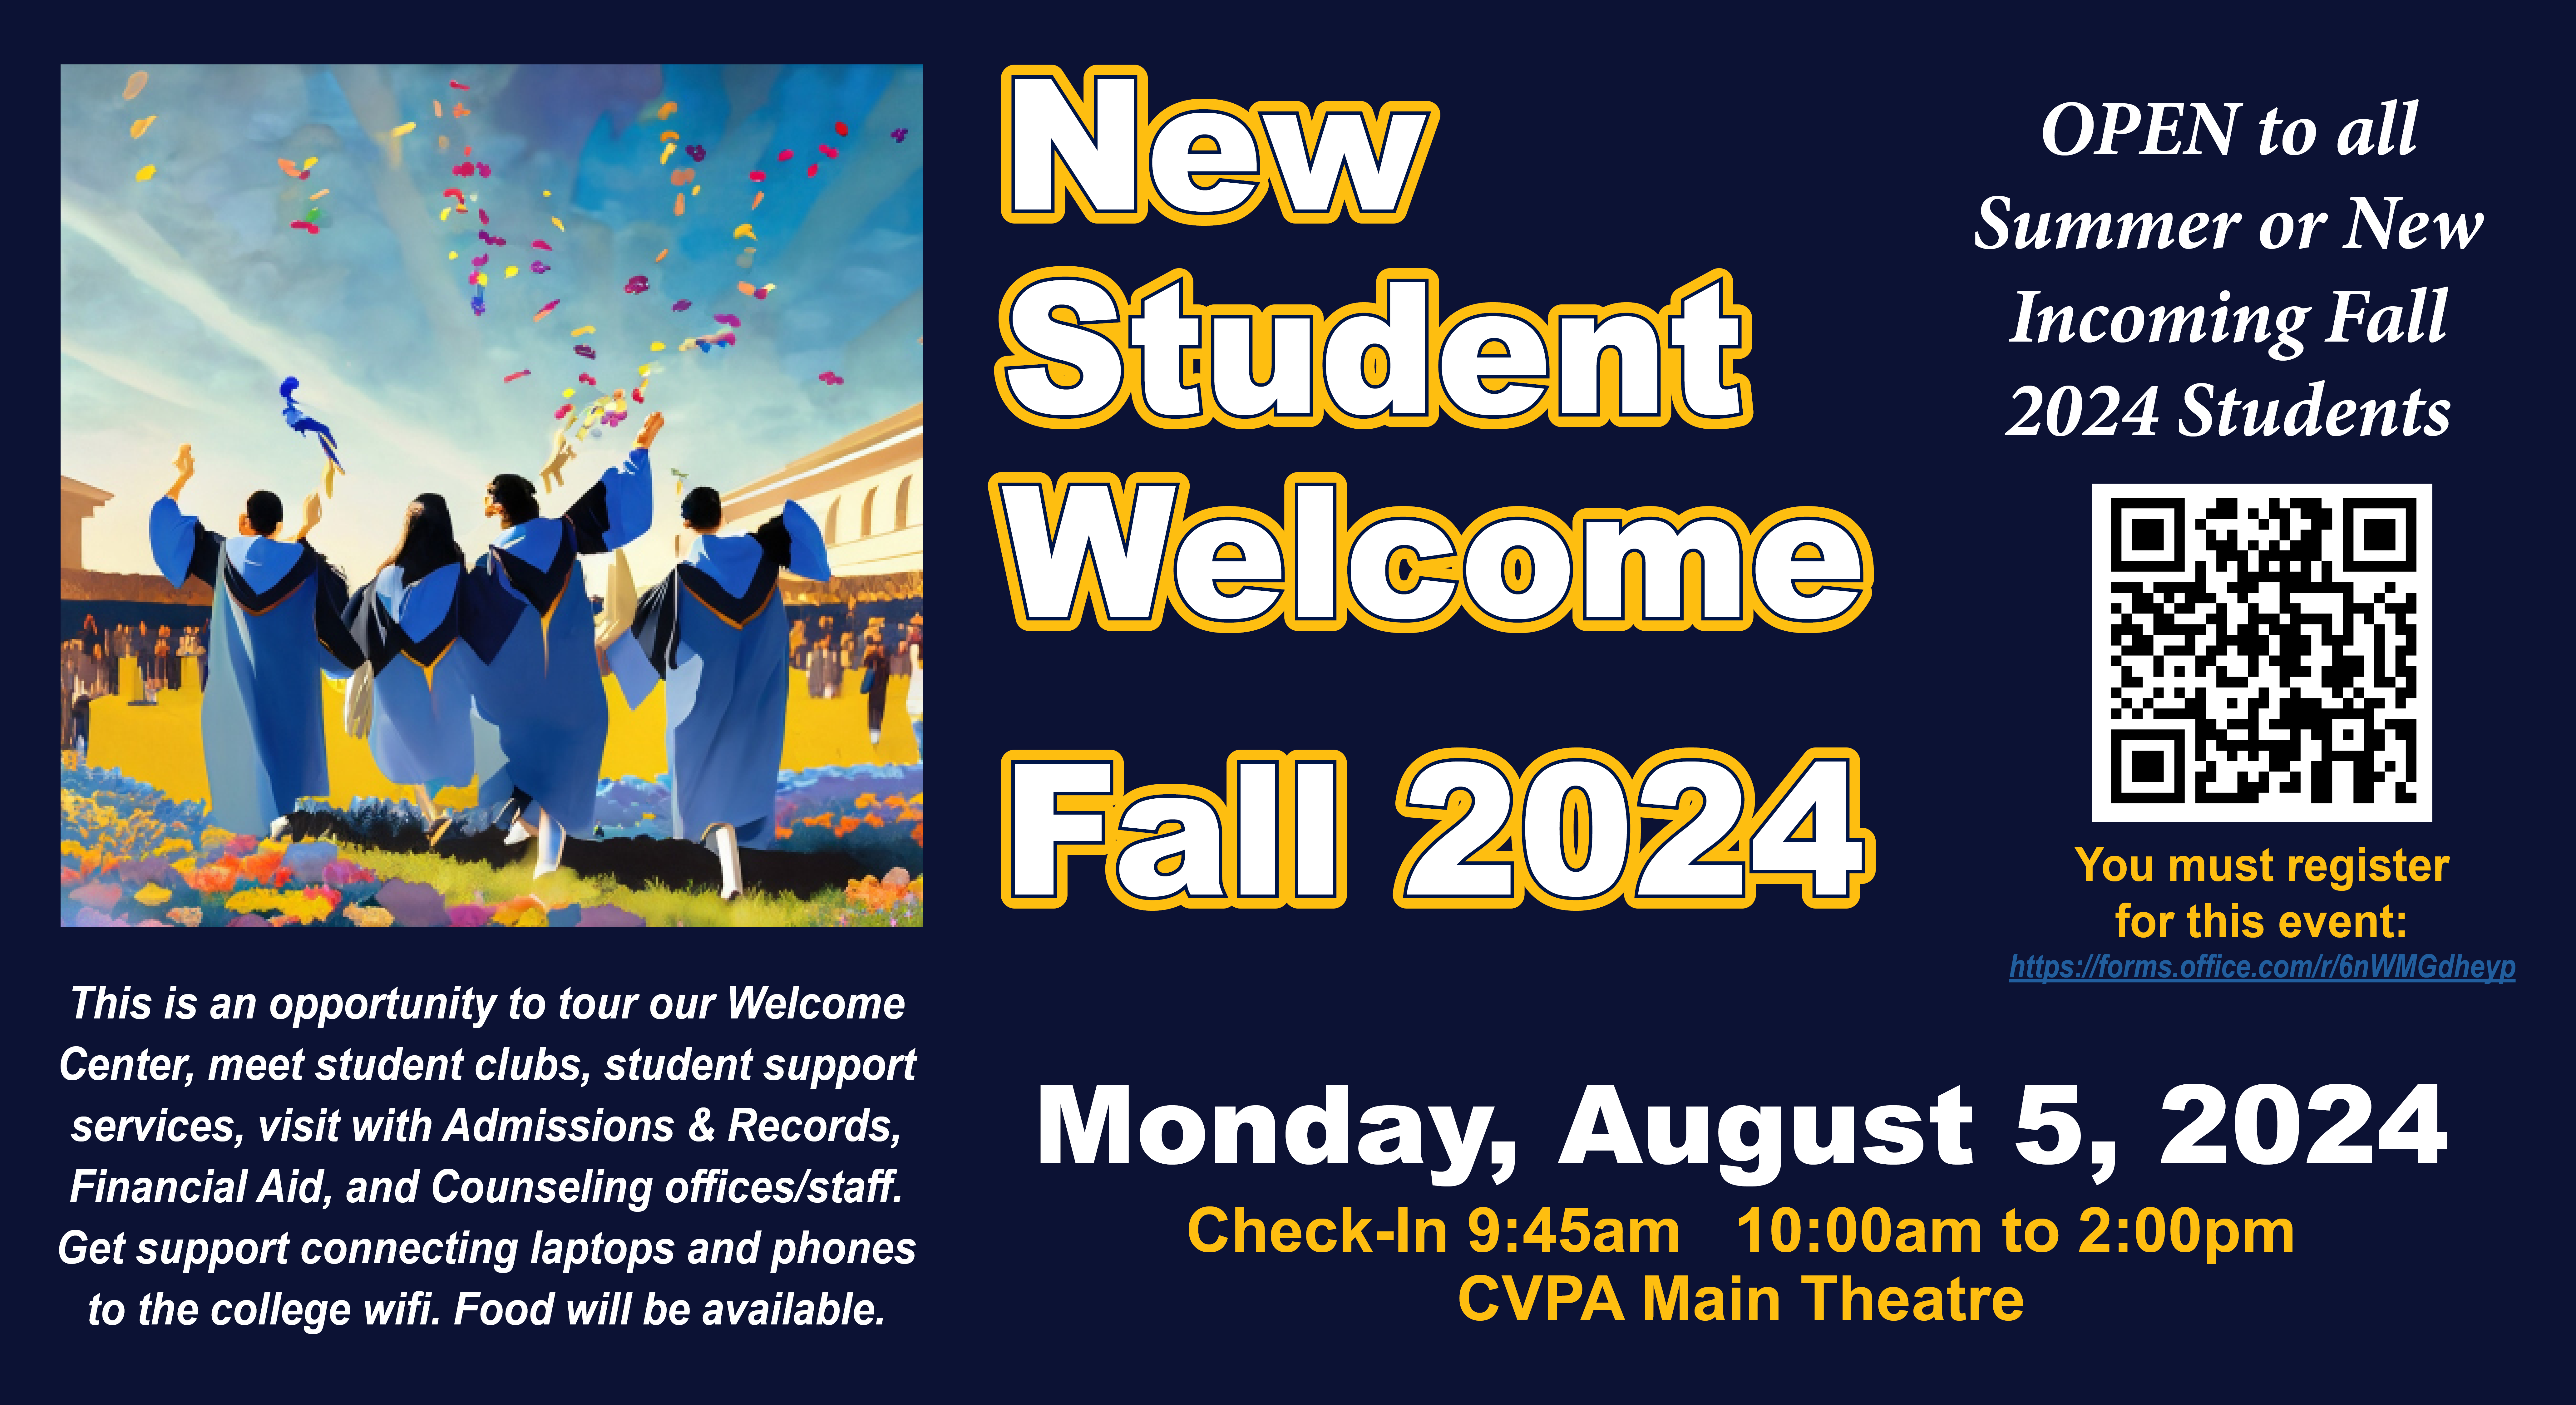 New Student Welcome Fall 2024